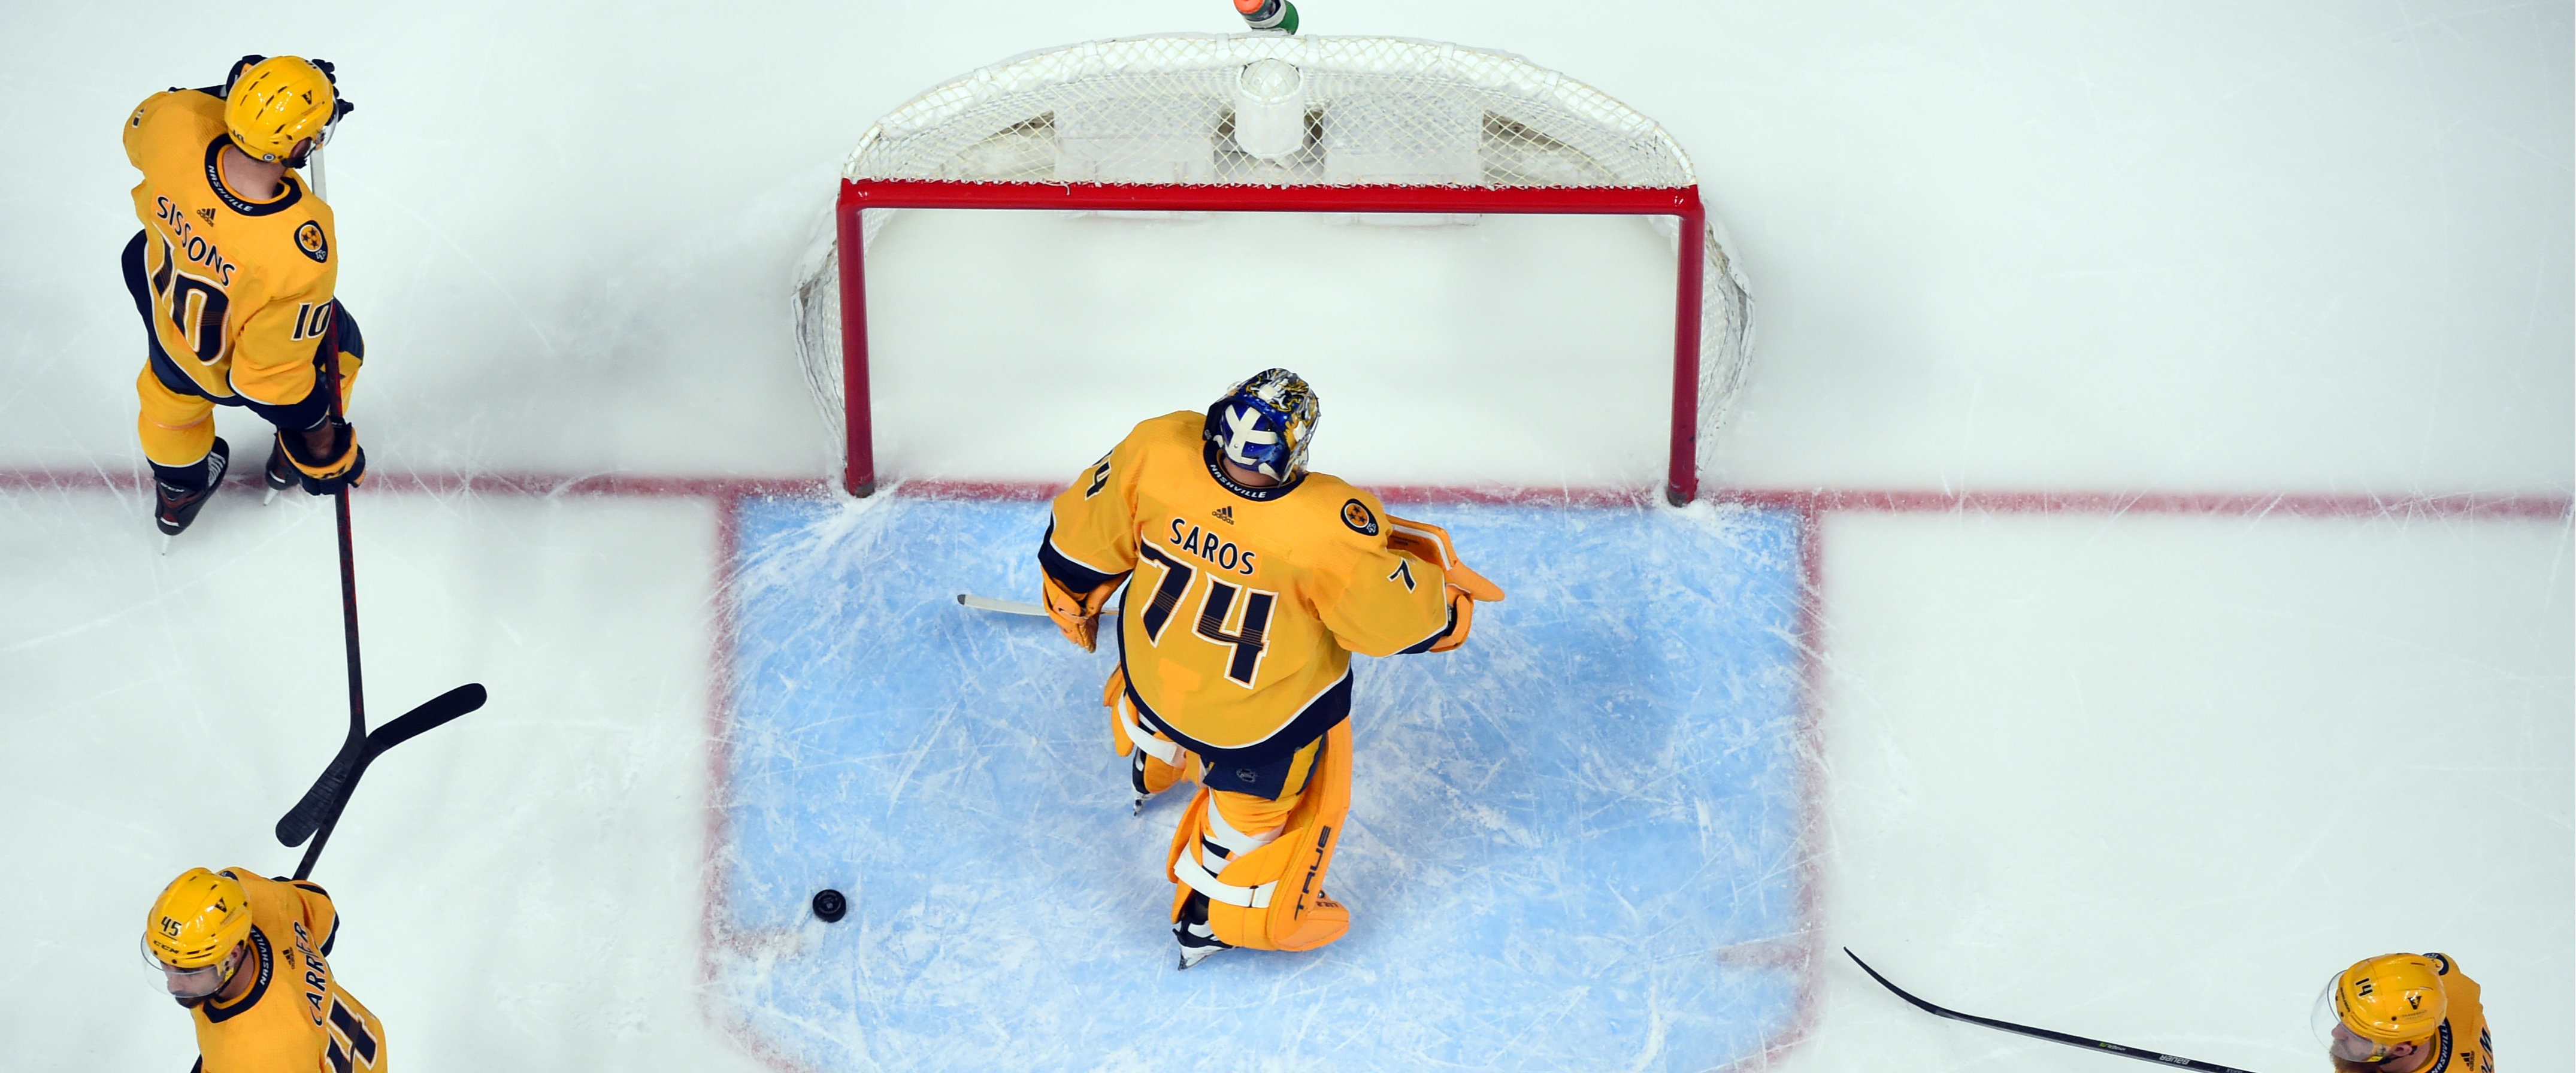 The Predators record against playoff teams is good - but recent trend is discouraging